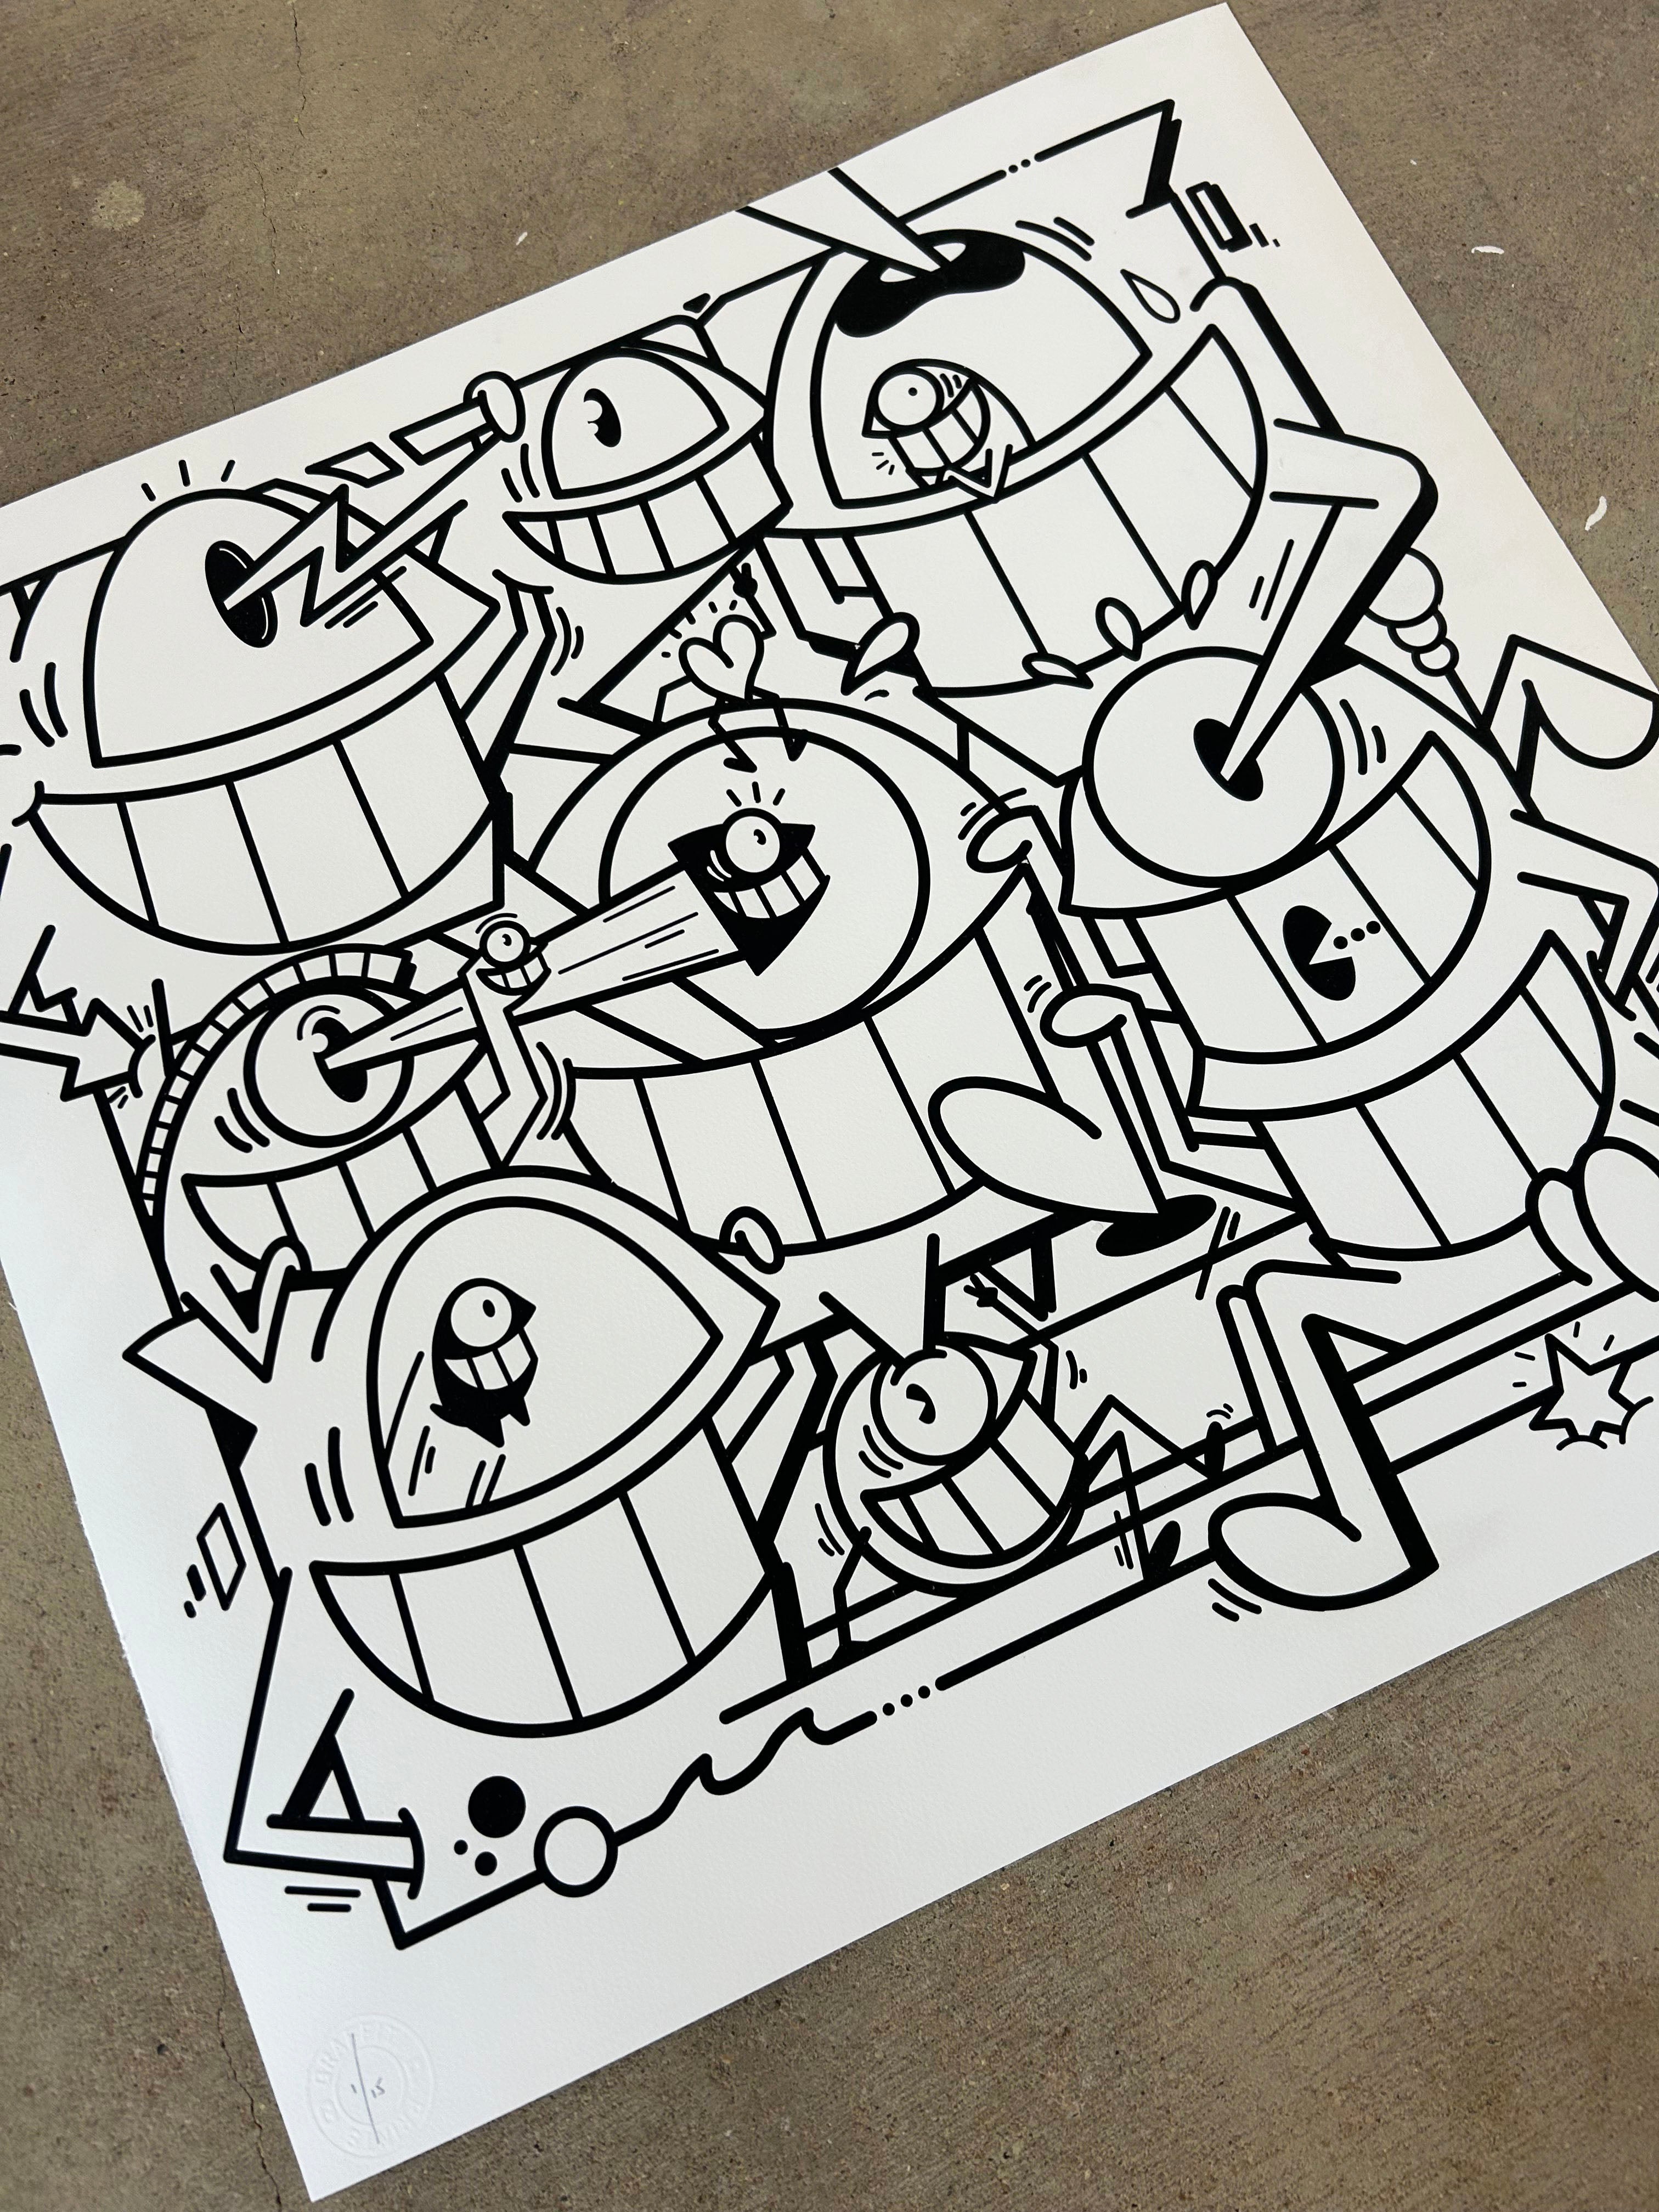 EL PEZ - SMILES IN STYLE MONO - ed 15 with free mini screen print for colouring in